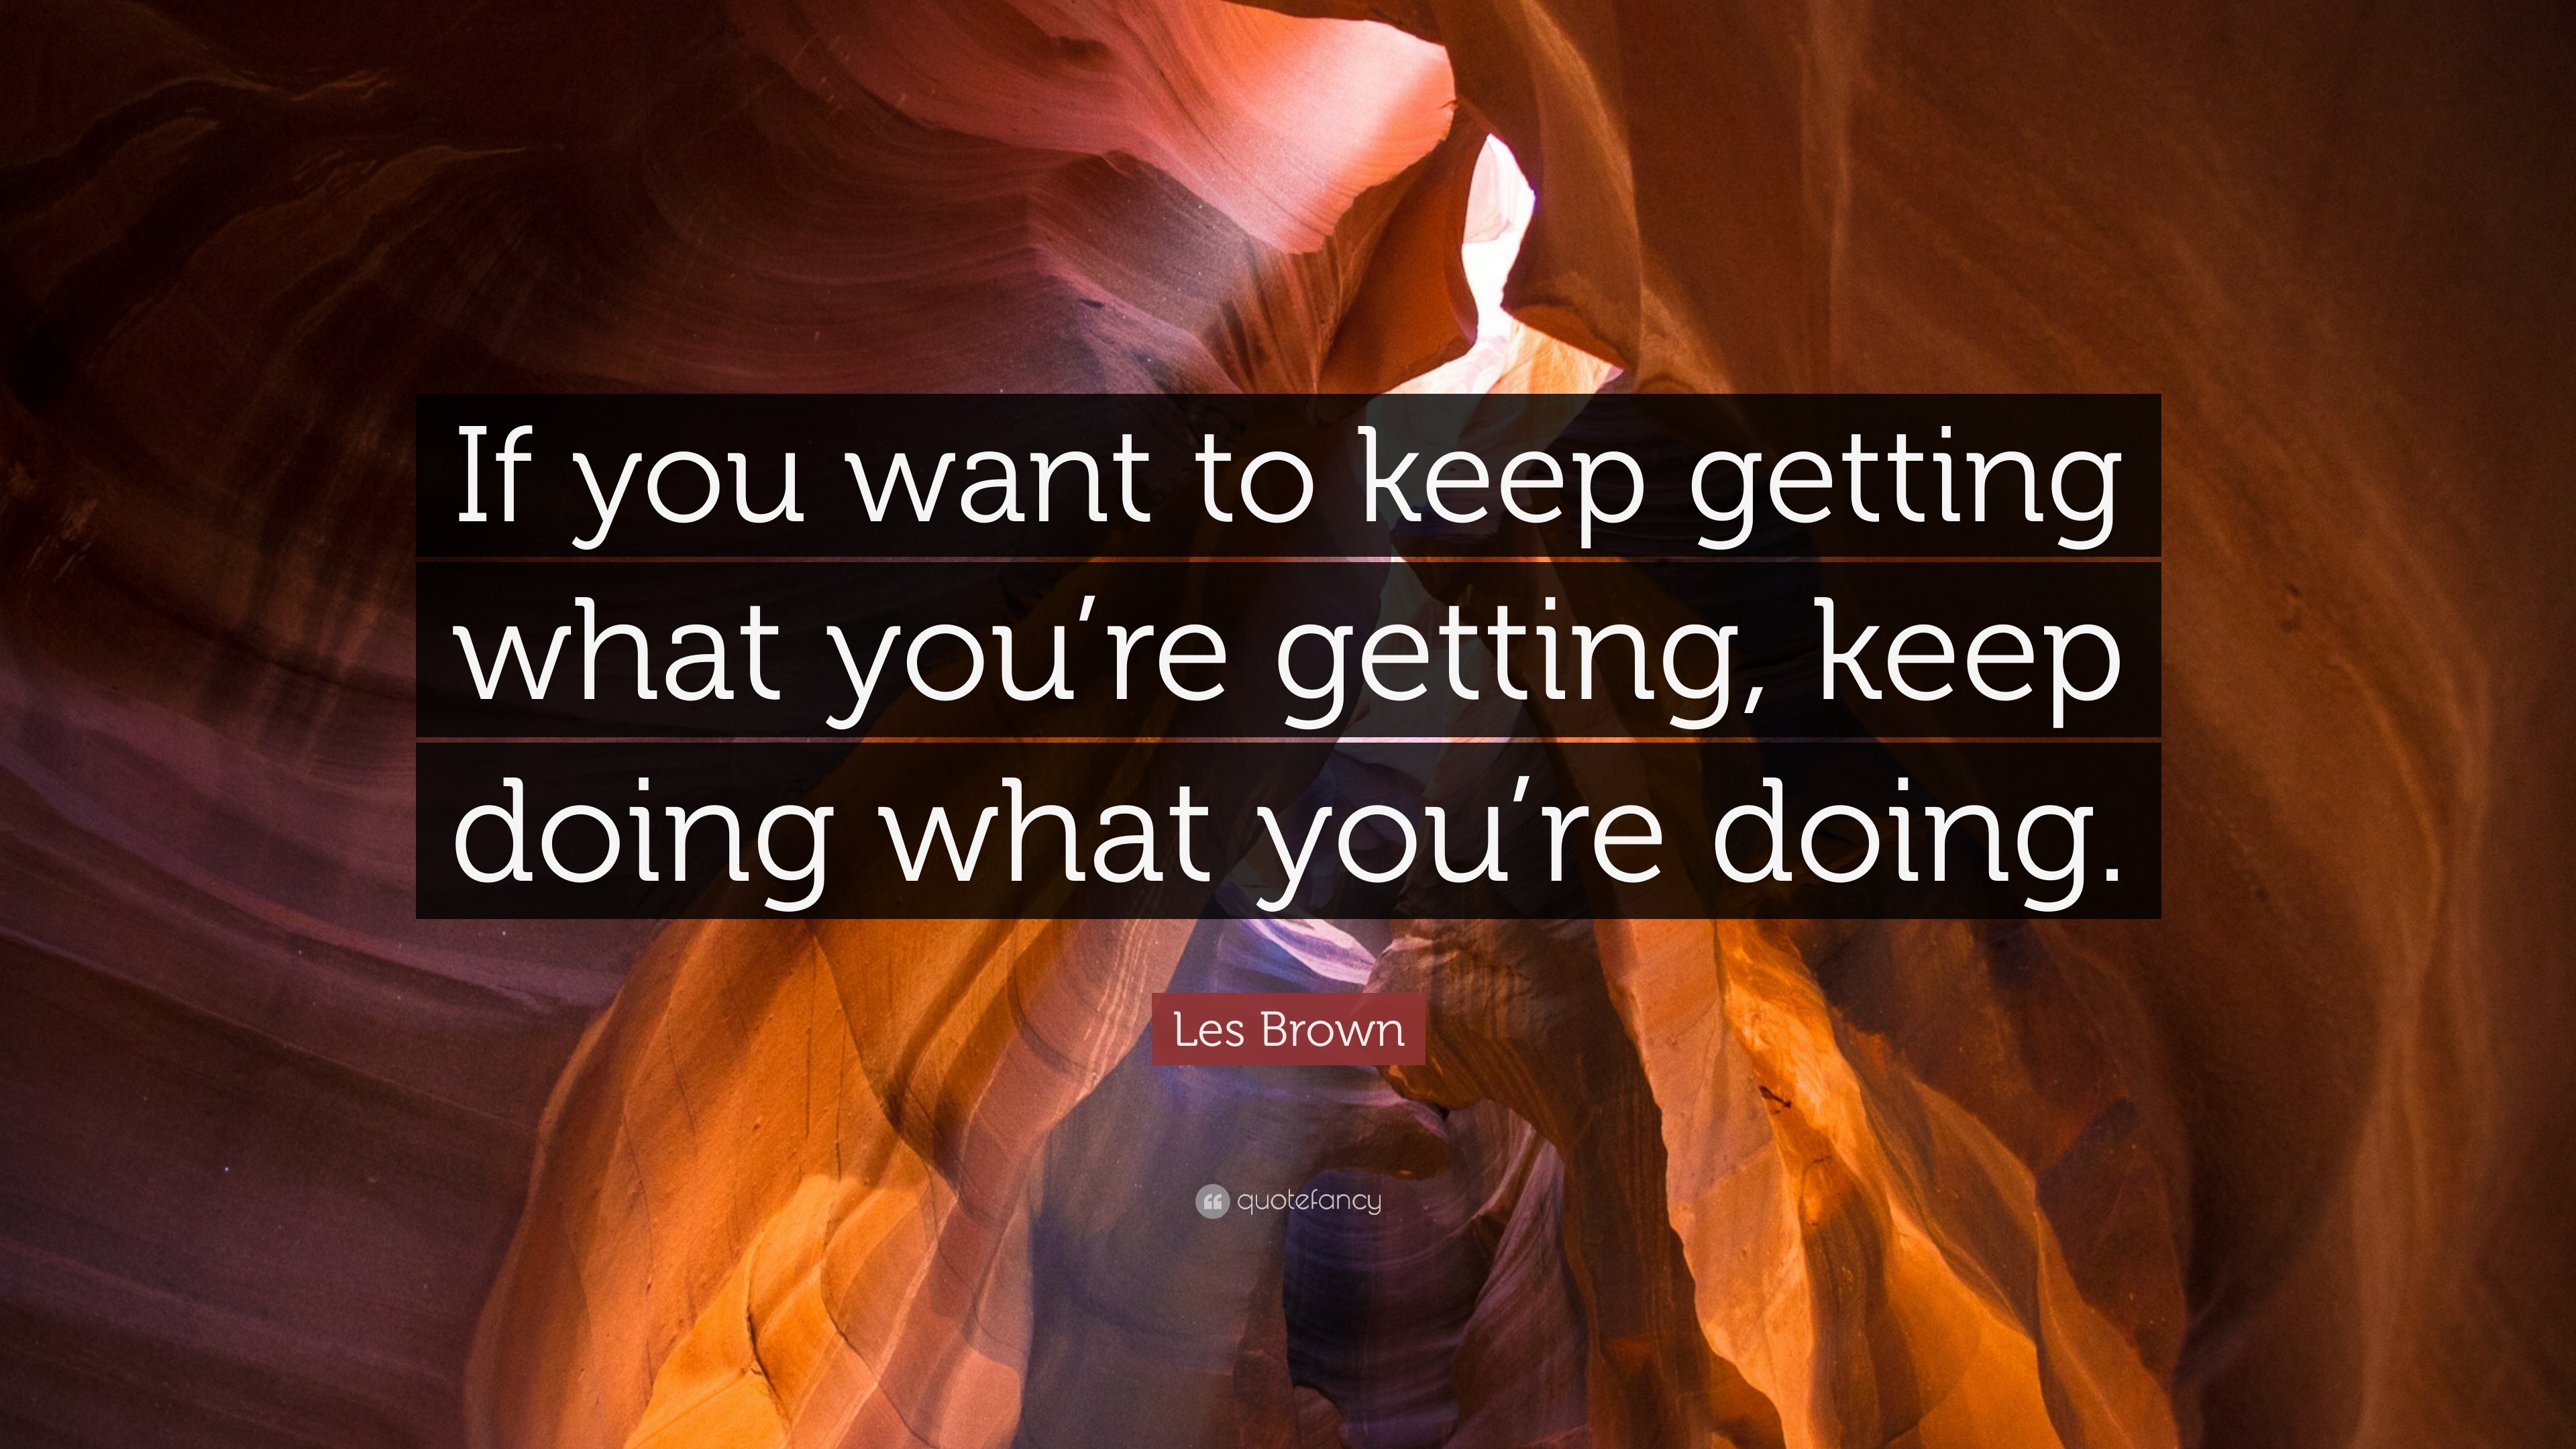 Les Brown Quote If You Want To Keep Getting What You Re Getting Keep Doing What